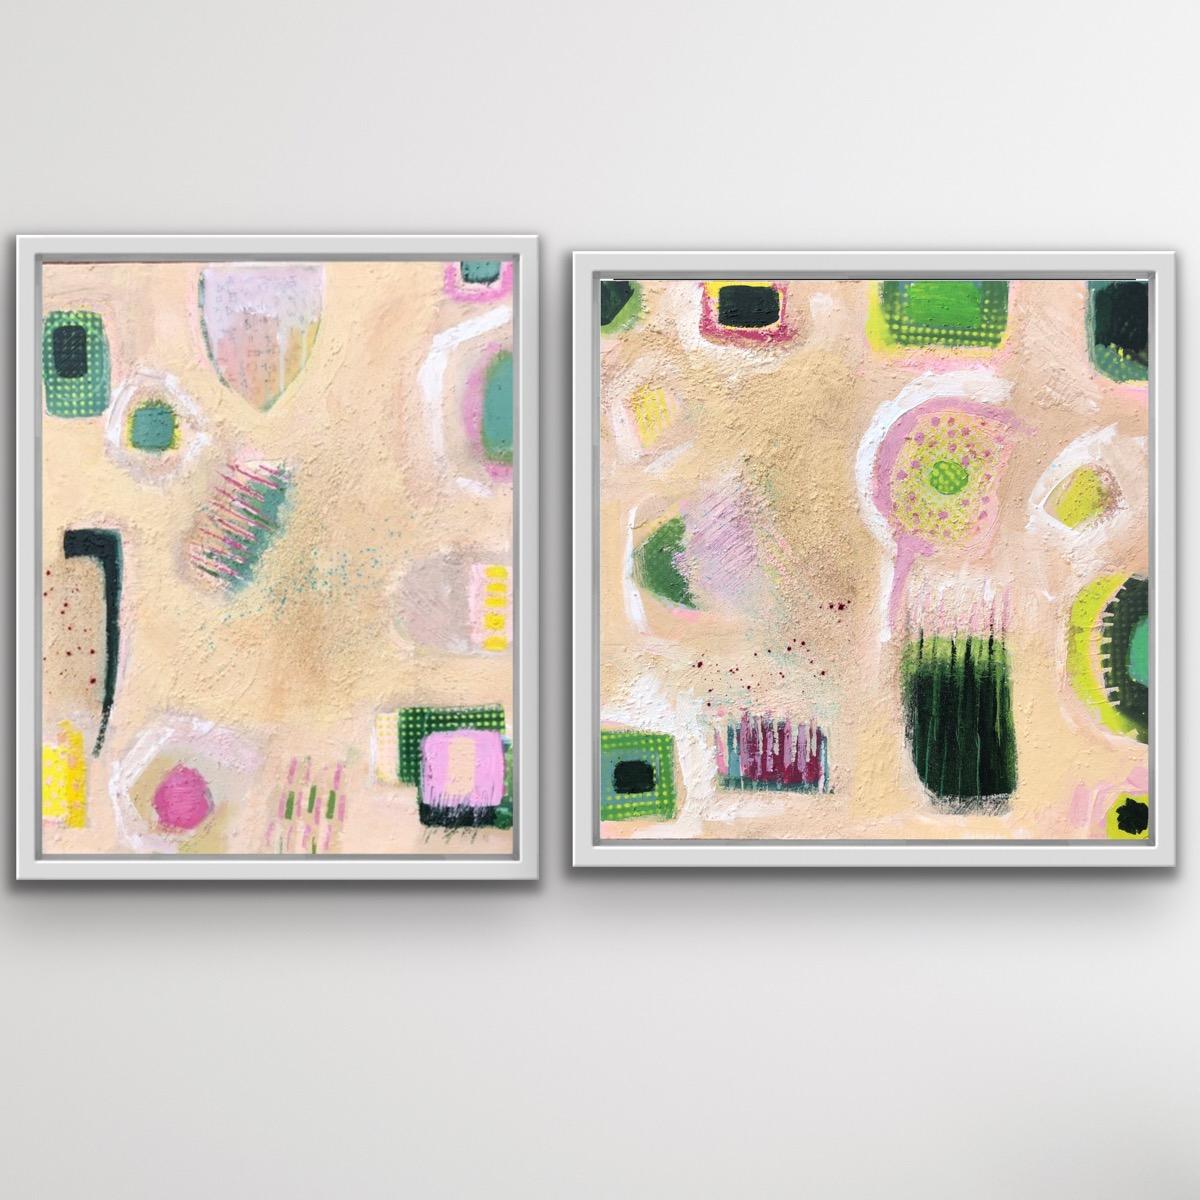 Abstract Painting Maggie LaPorte Banks - Mamma Mia and Turn the Heat Up Diptych ( Mamma Mia et Turn the Heat Up Diptyque)